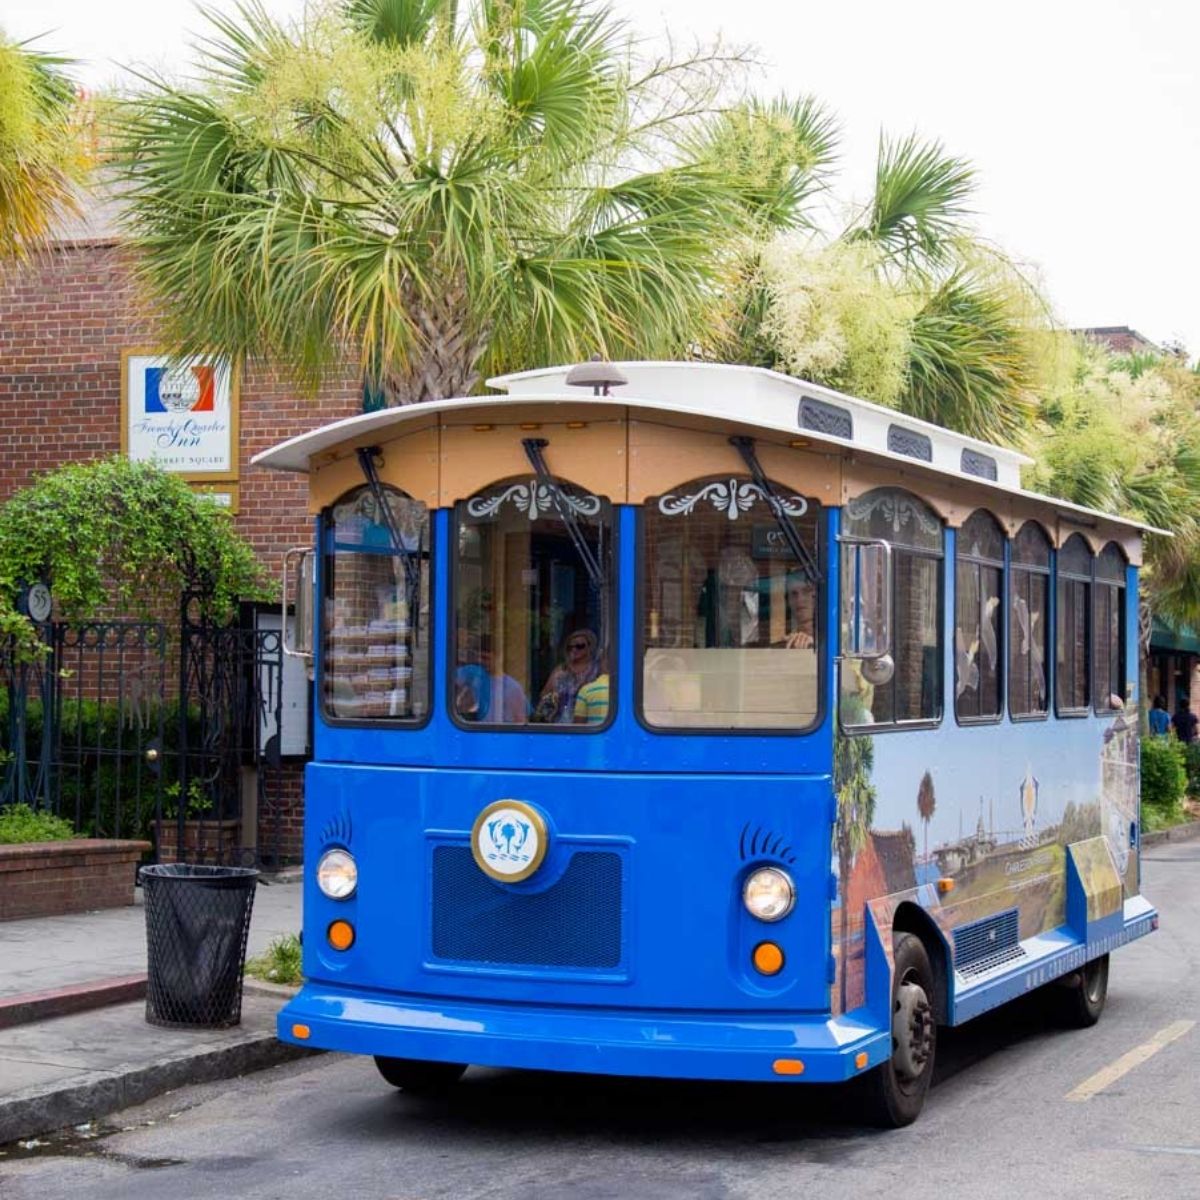 A blue tourist bus driving in Charleston with palm trees in the background.